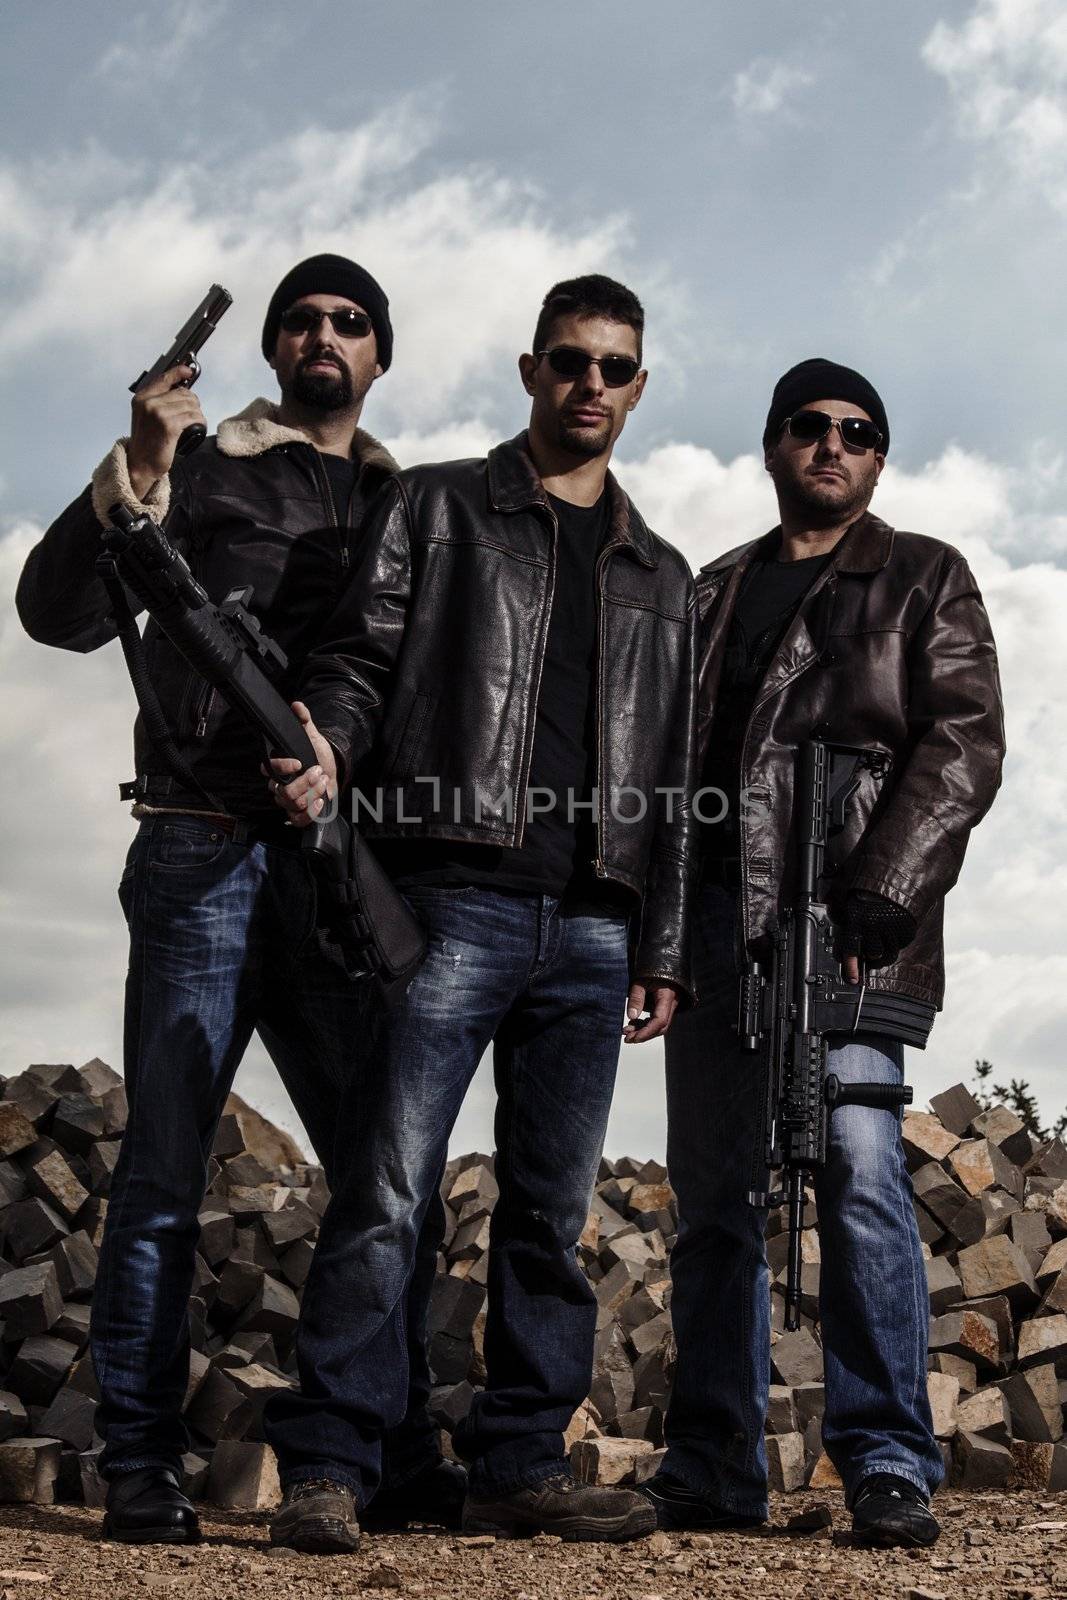 View of a group of gang members with guns.